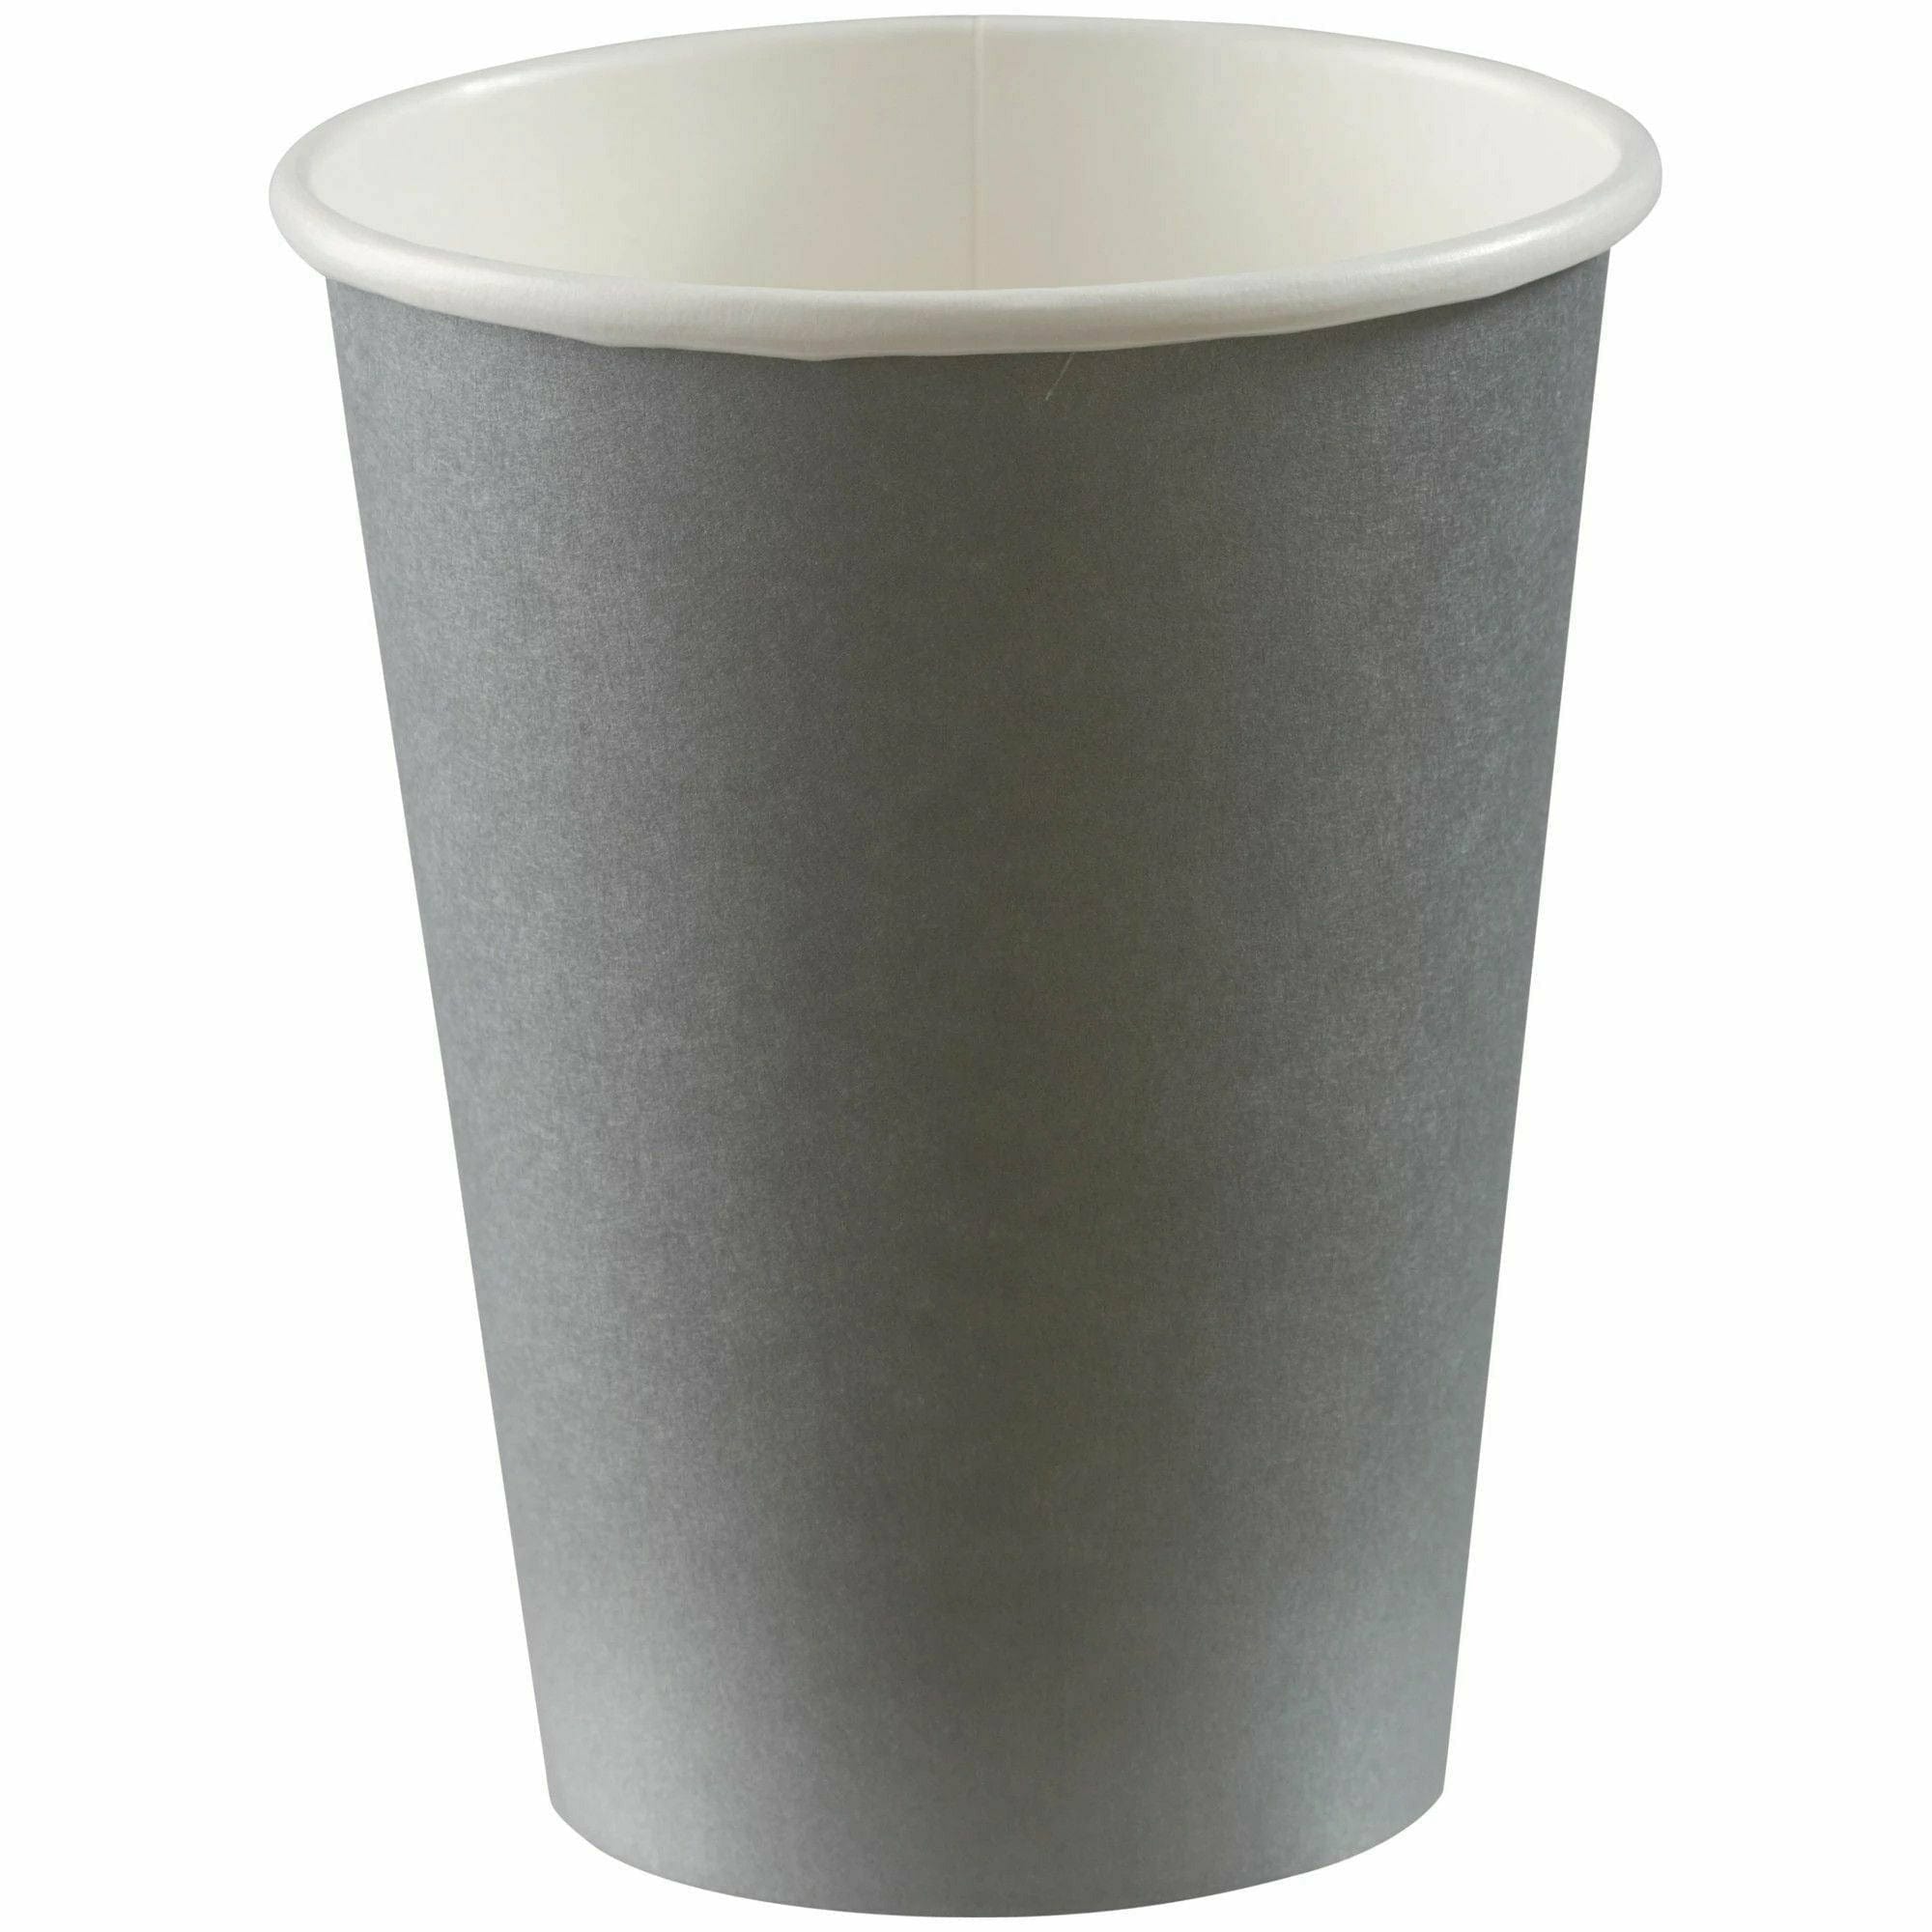 Amscan BASIC Silver - 12 oz. Paper Cups, 50 Ct.